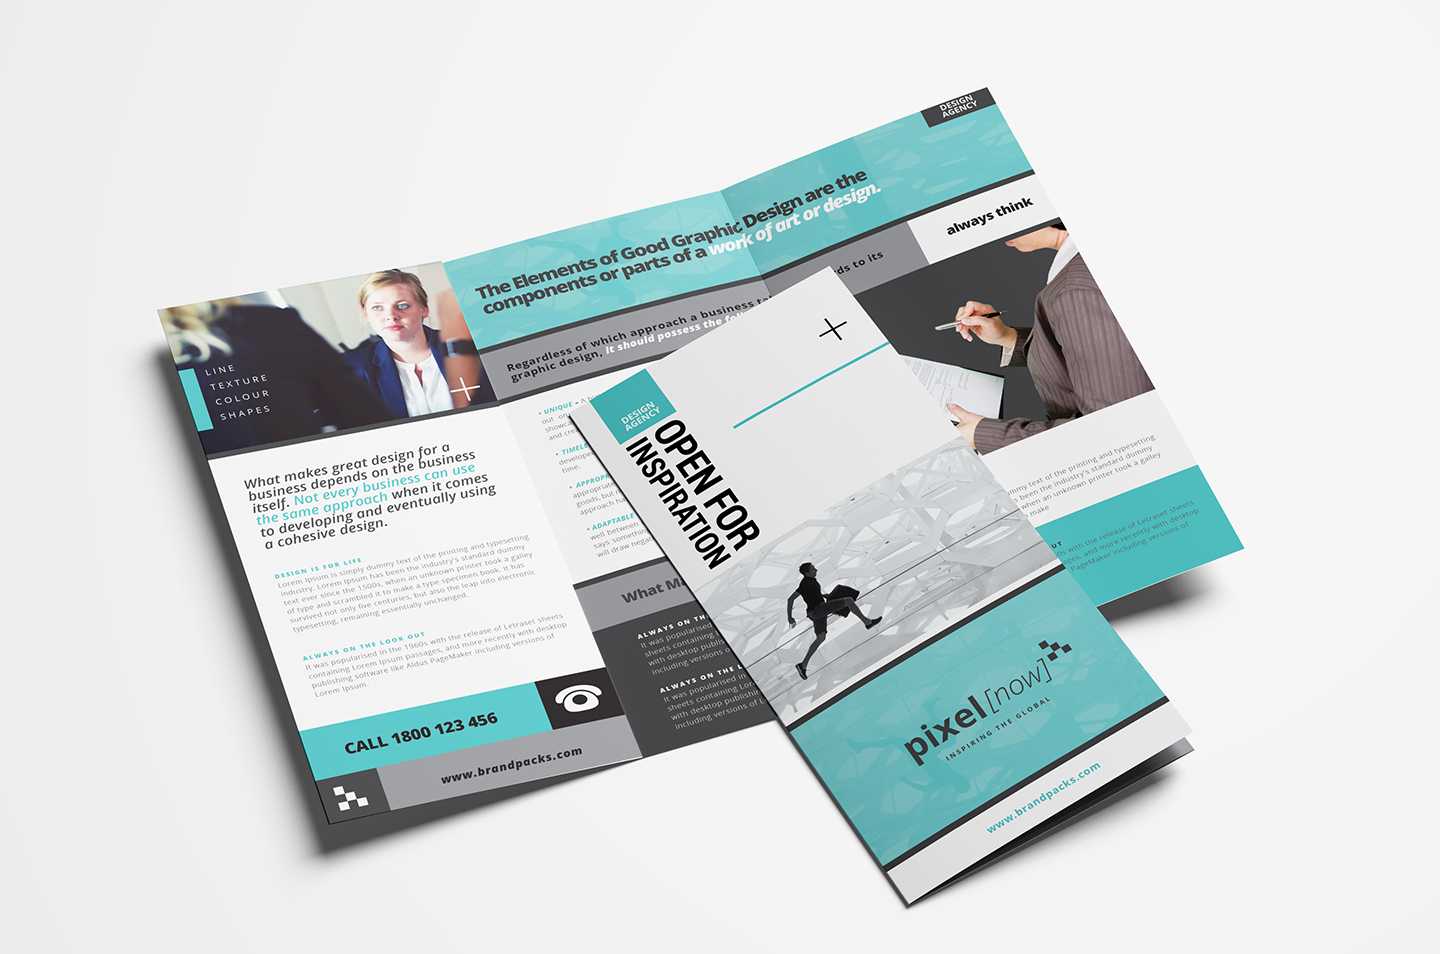 Free Business Trifold Brochure Template In Psd & Vector Intended For 3 Fold Brochure Template Psd Free Download